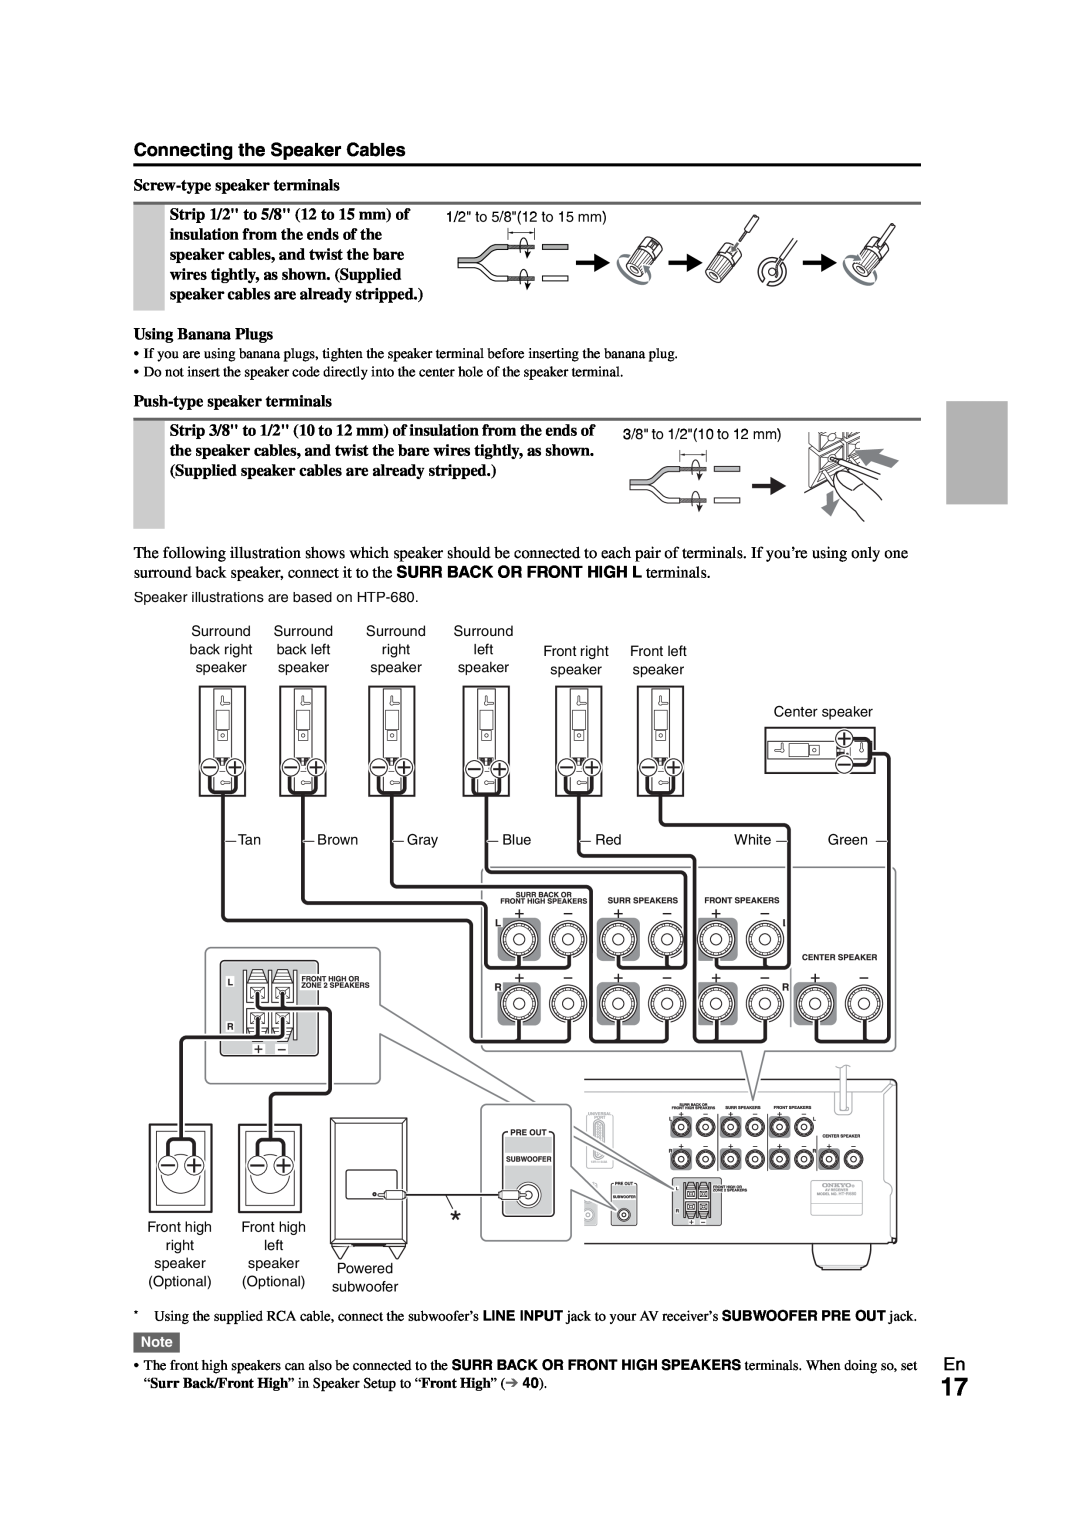 Onkyo HT-S7300 instruction manual Connecting the Speaker Cables 